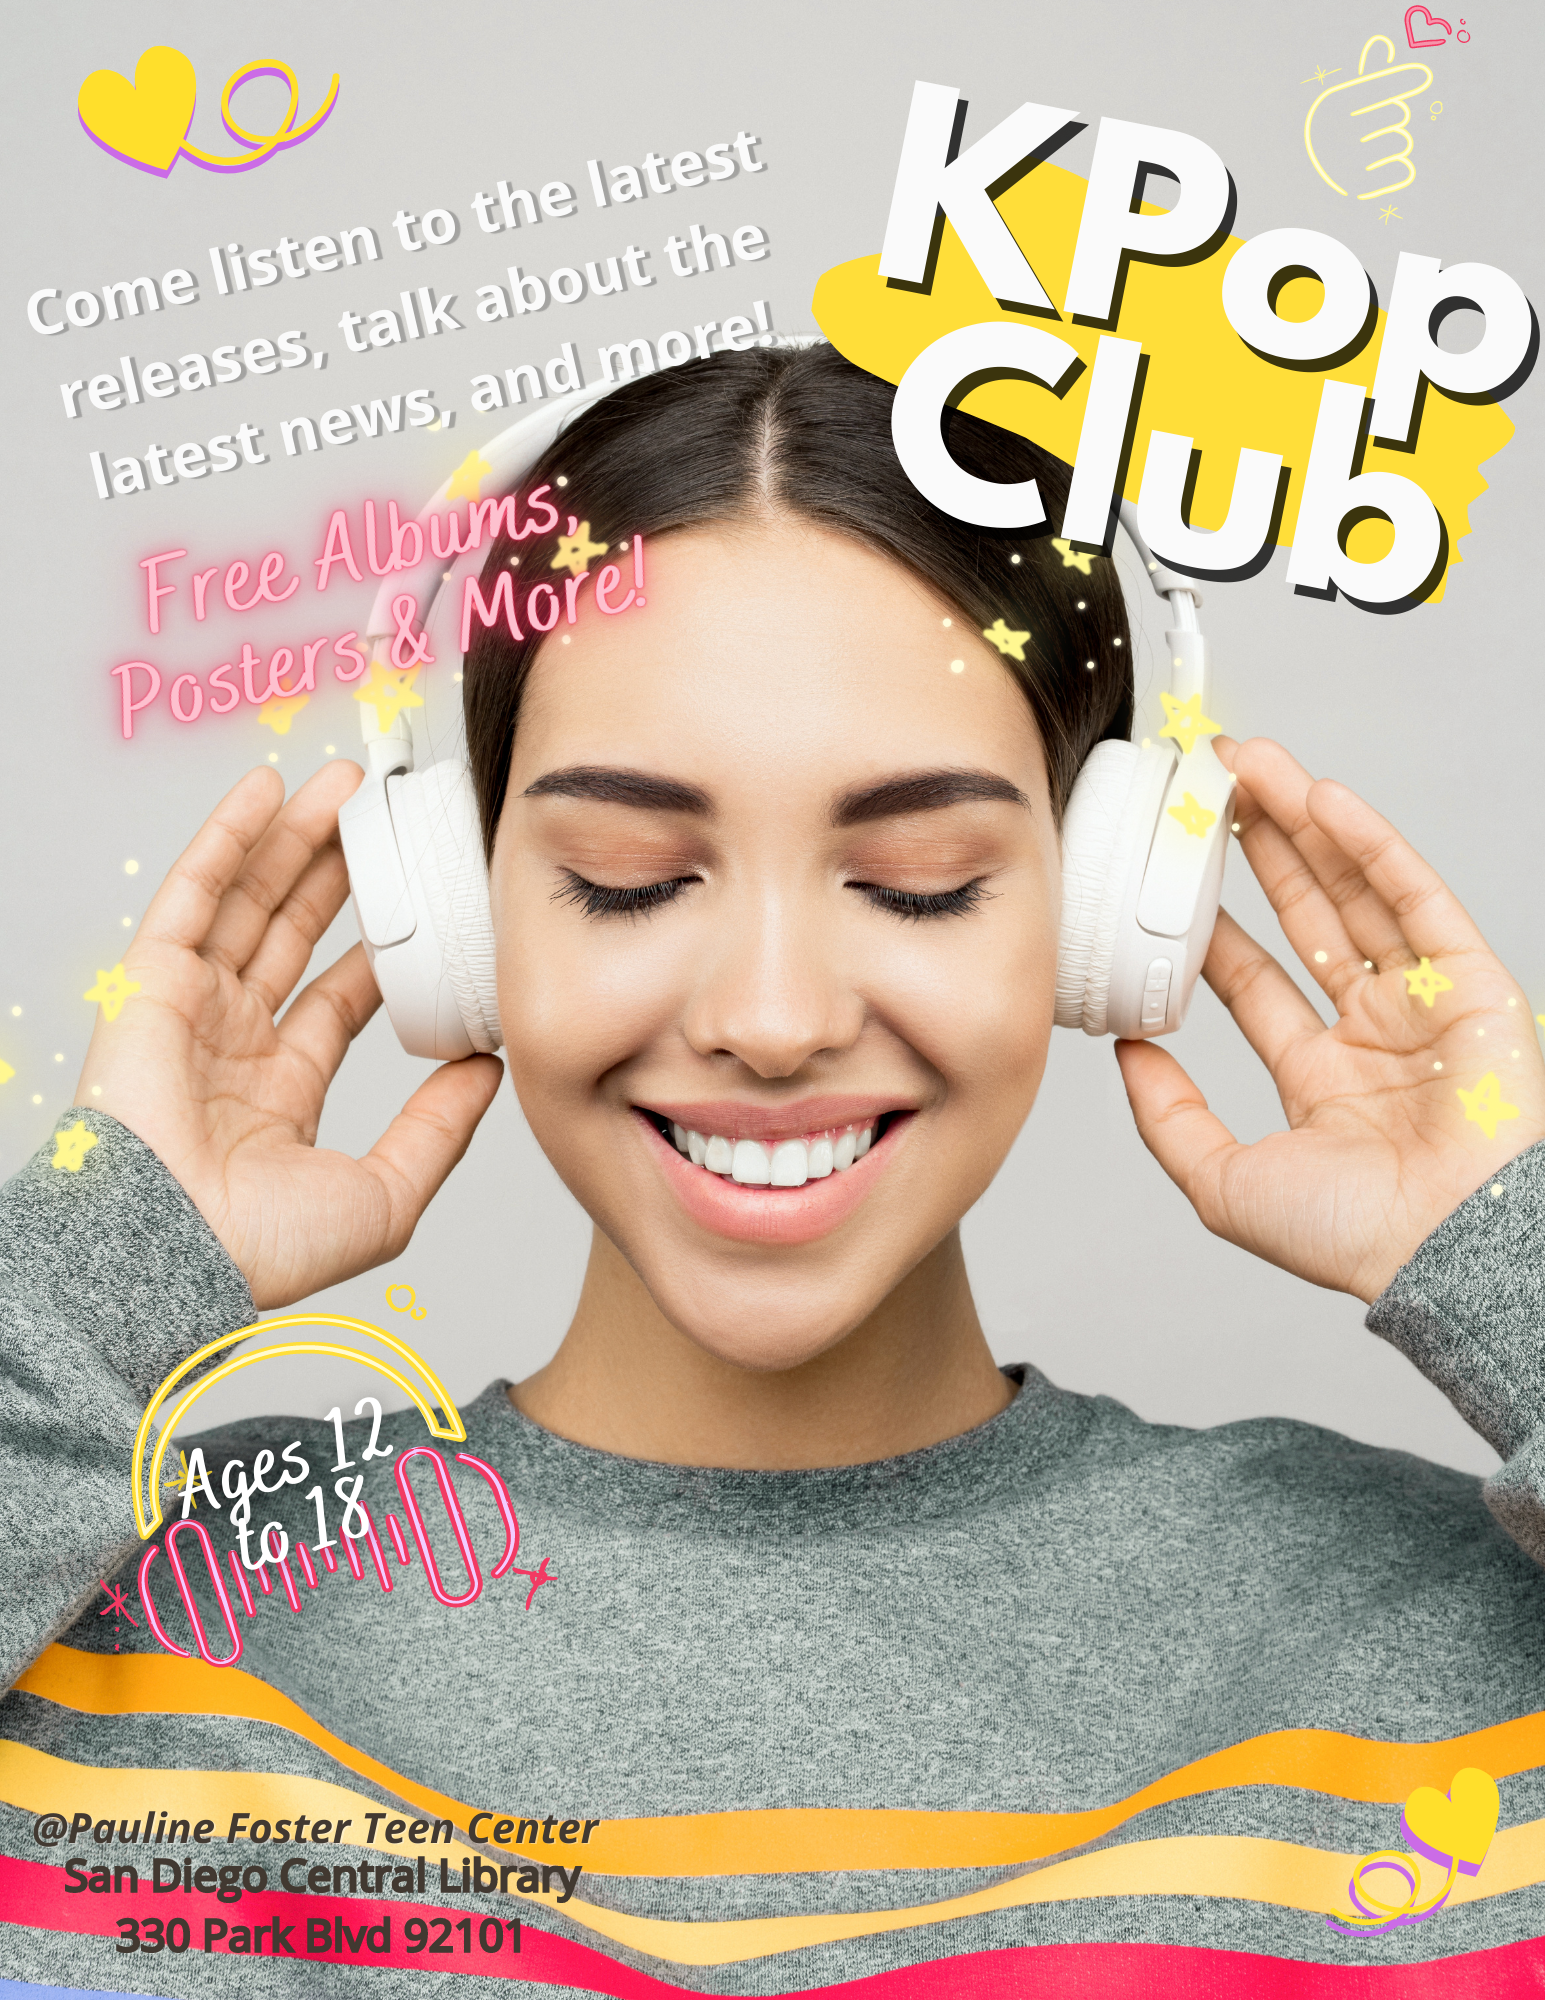 Come listen to the latest releases, talk about the latest news, and more! Free albums. Ages 12-18. @Pauline Foster Teen Center. San Diego Central Library, 330 Park Blvd. 92101.   